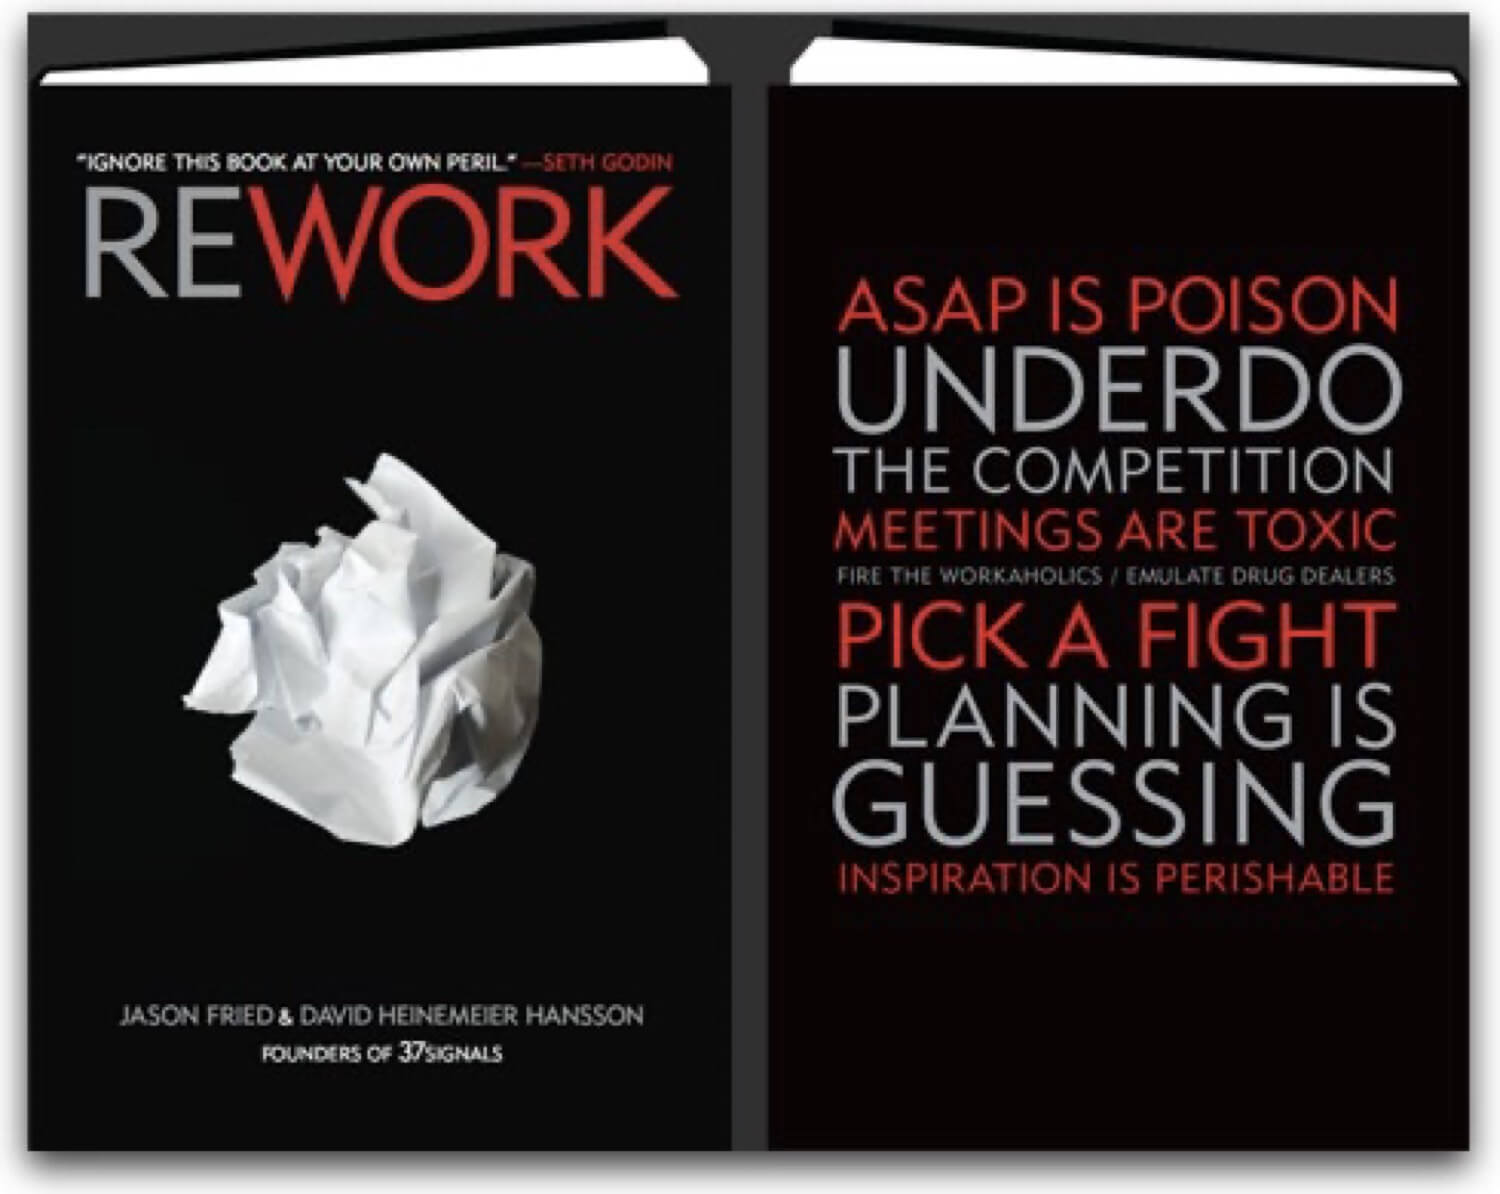 Review of 37signals’ cookbook called REWORK - getting business done